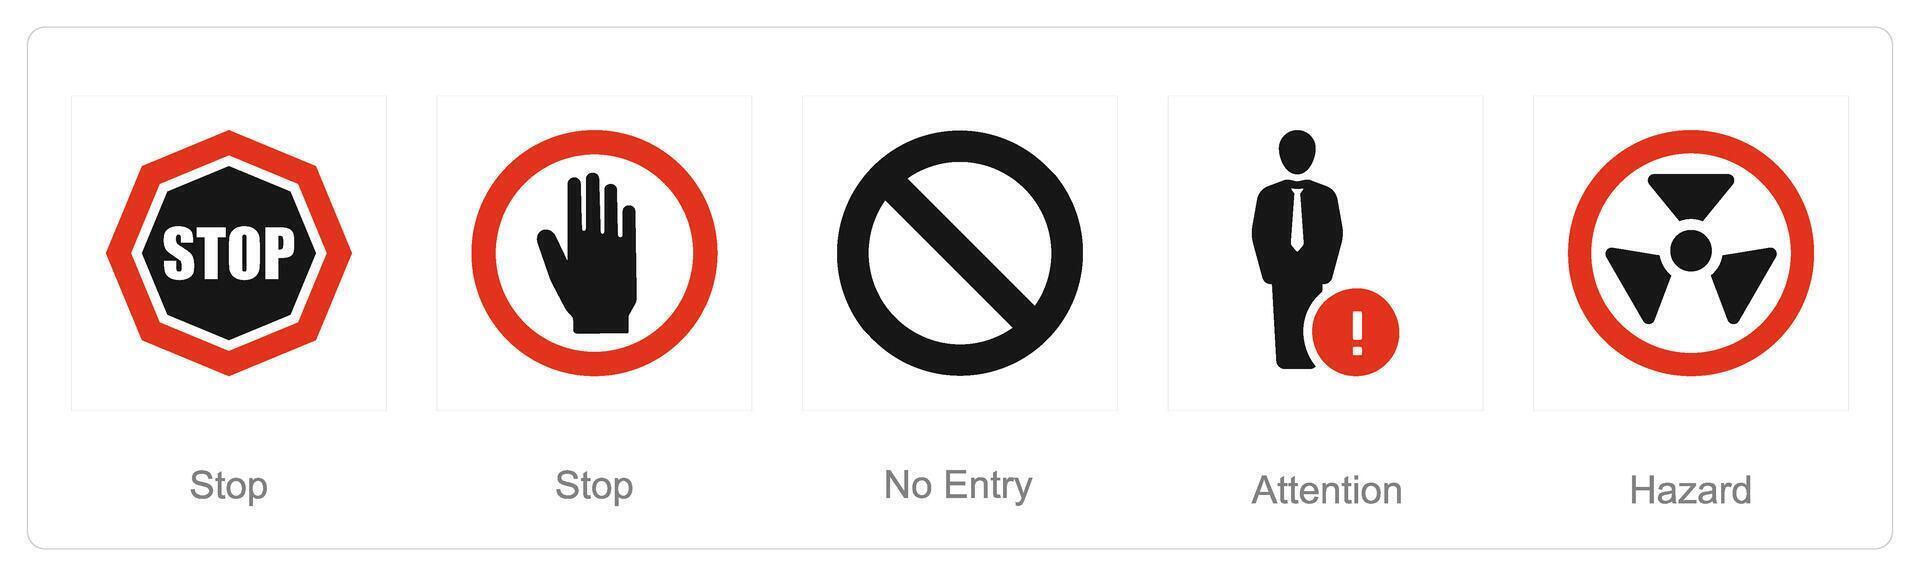 A set of 5 Hazard Danger icons as stop, no entry, attention vector